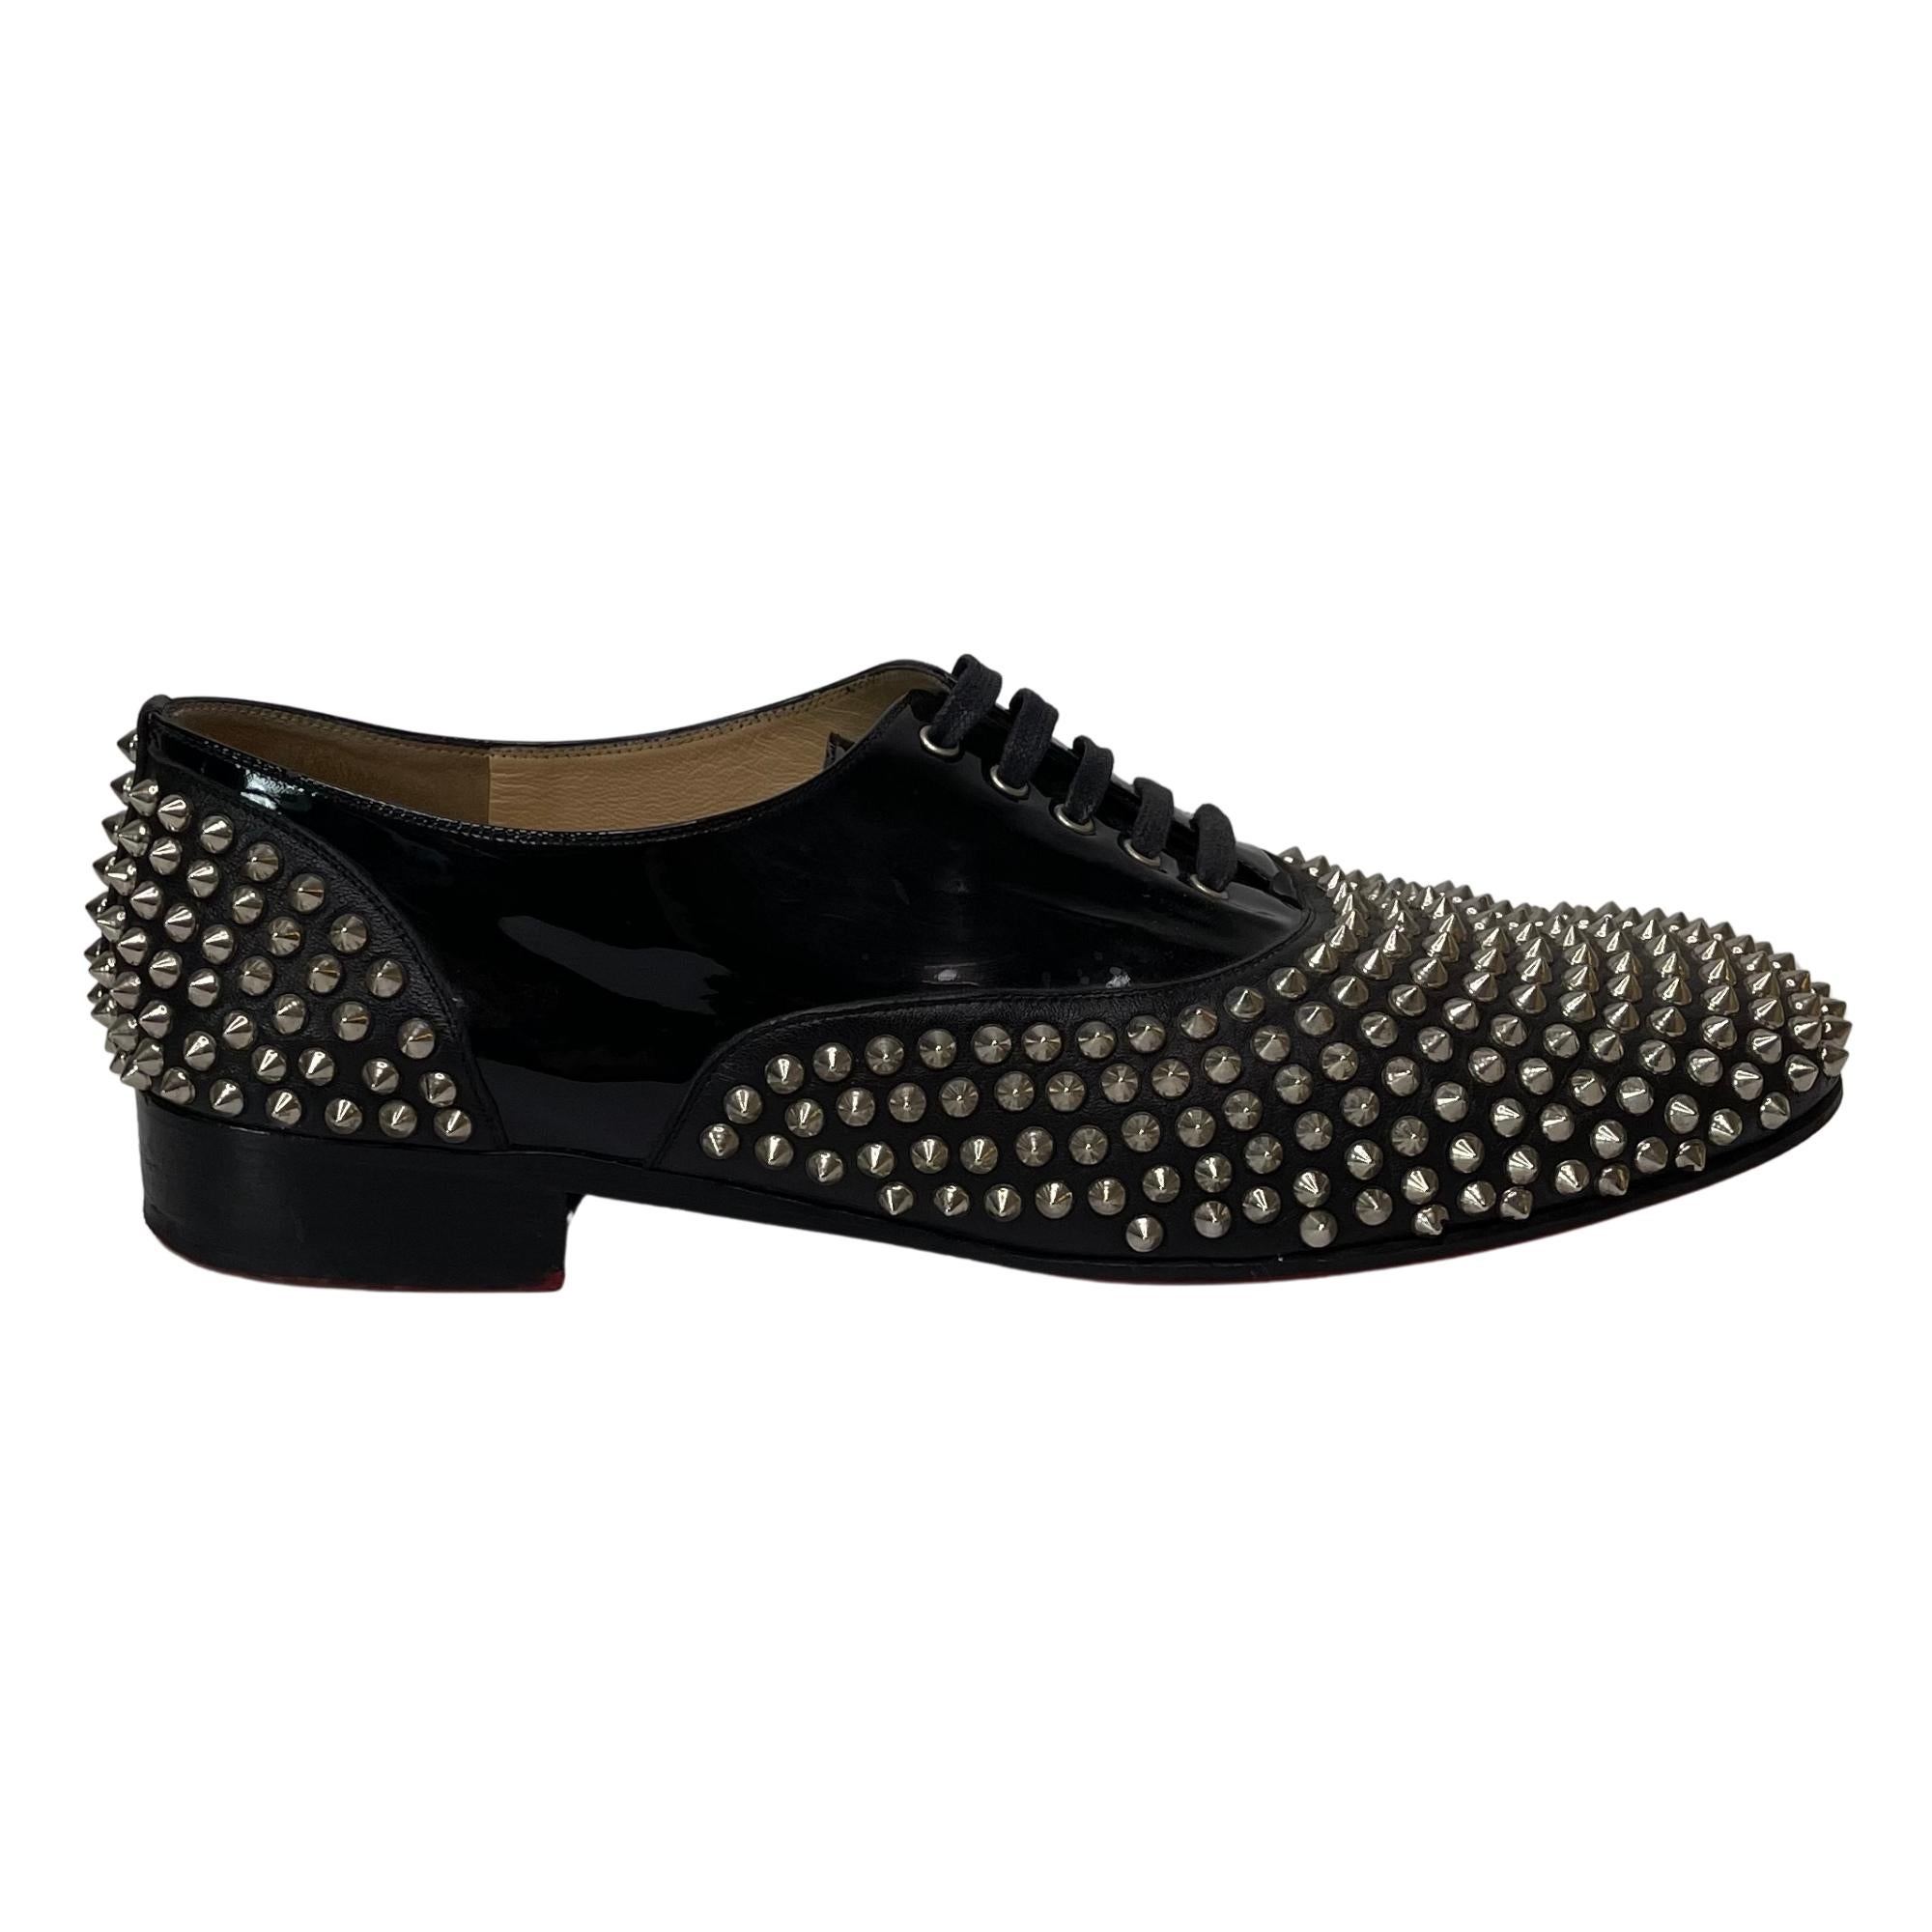 Christian Louboutin Black Patent Leather Spiked Oxfords (45 EU)